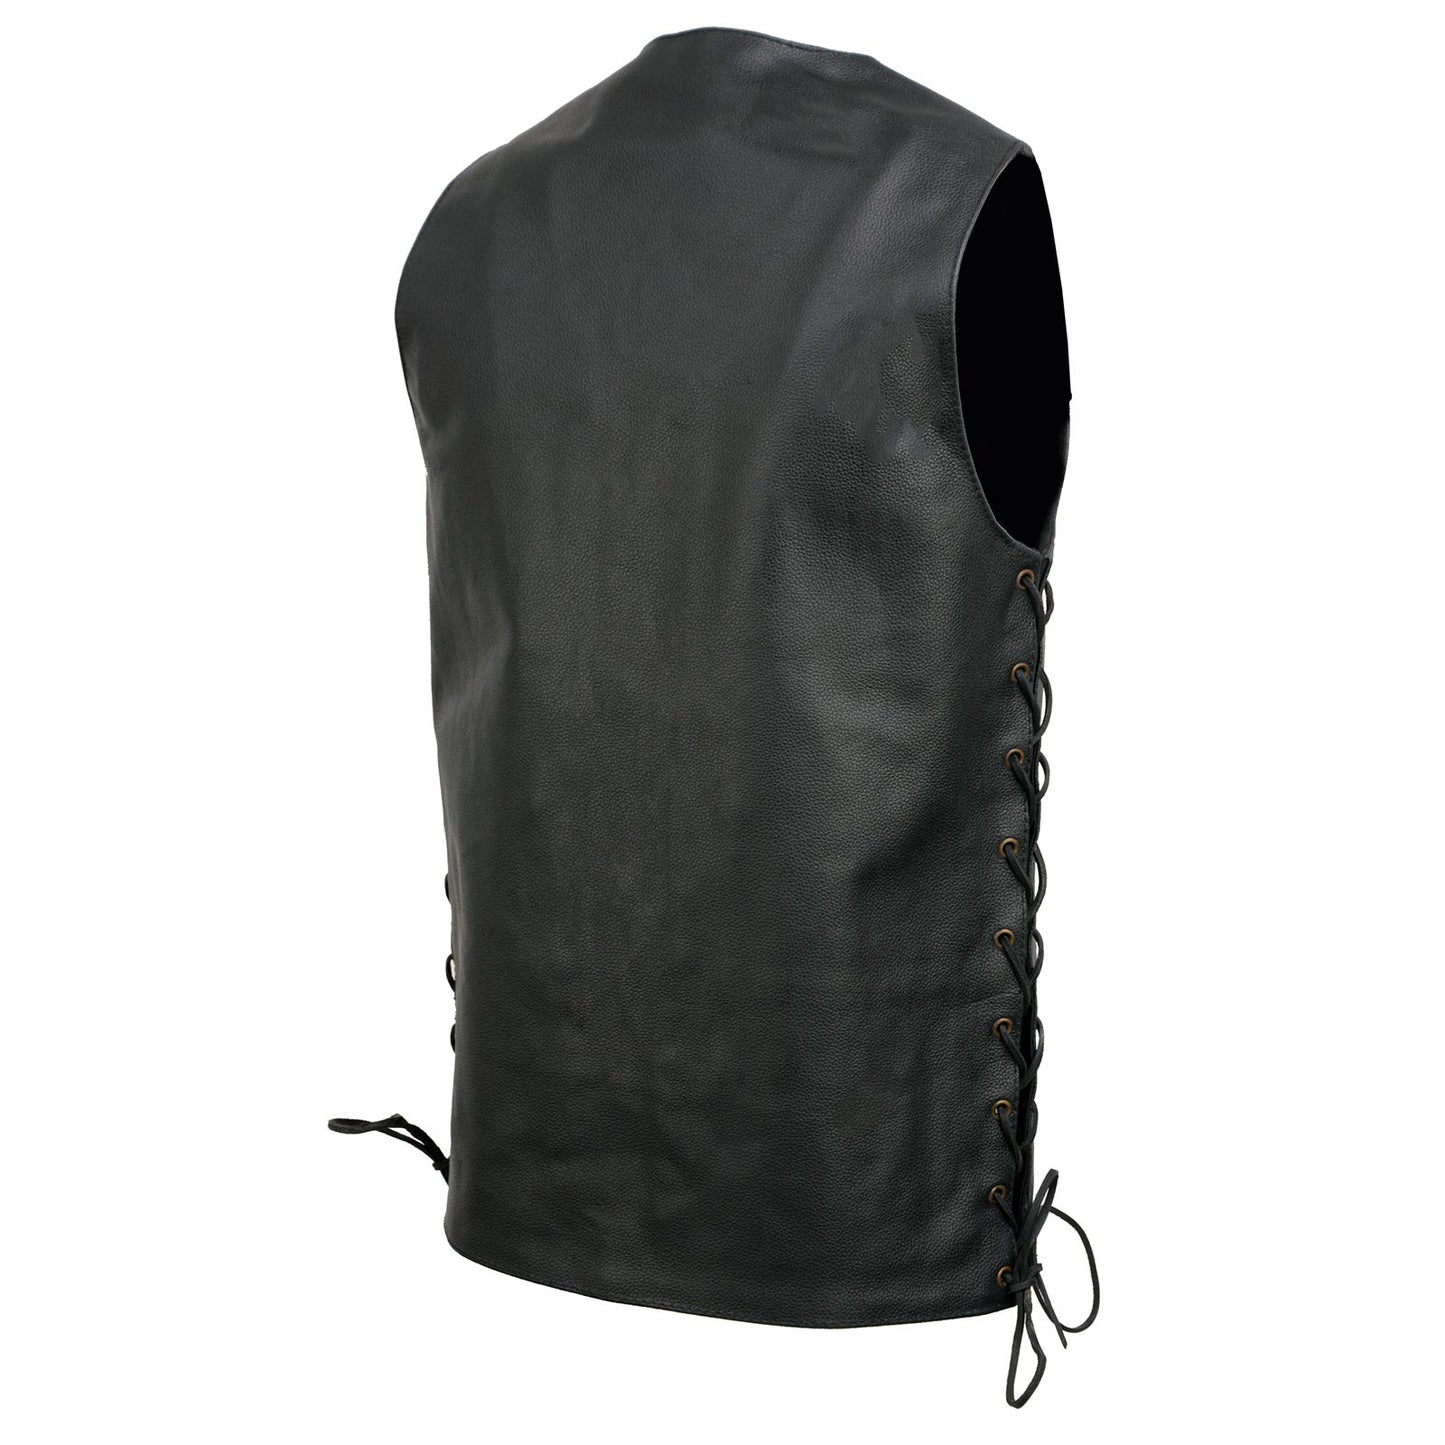 Event Leather EL5391TALL Black Motorcycle Leather Vest for Men Tall Sizes w/ 10 Pockets- Riding Club Adult Motorcycle Vests